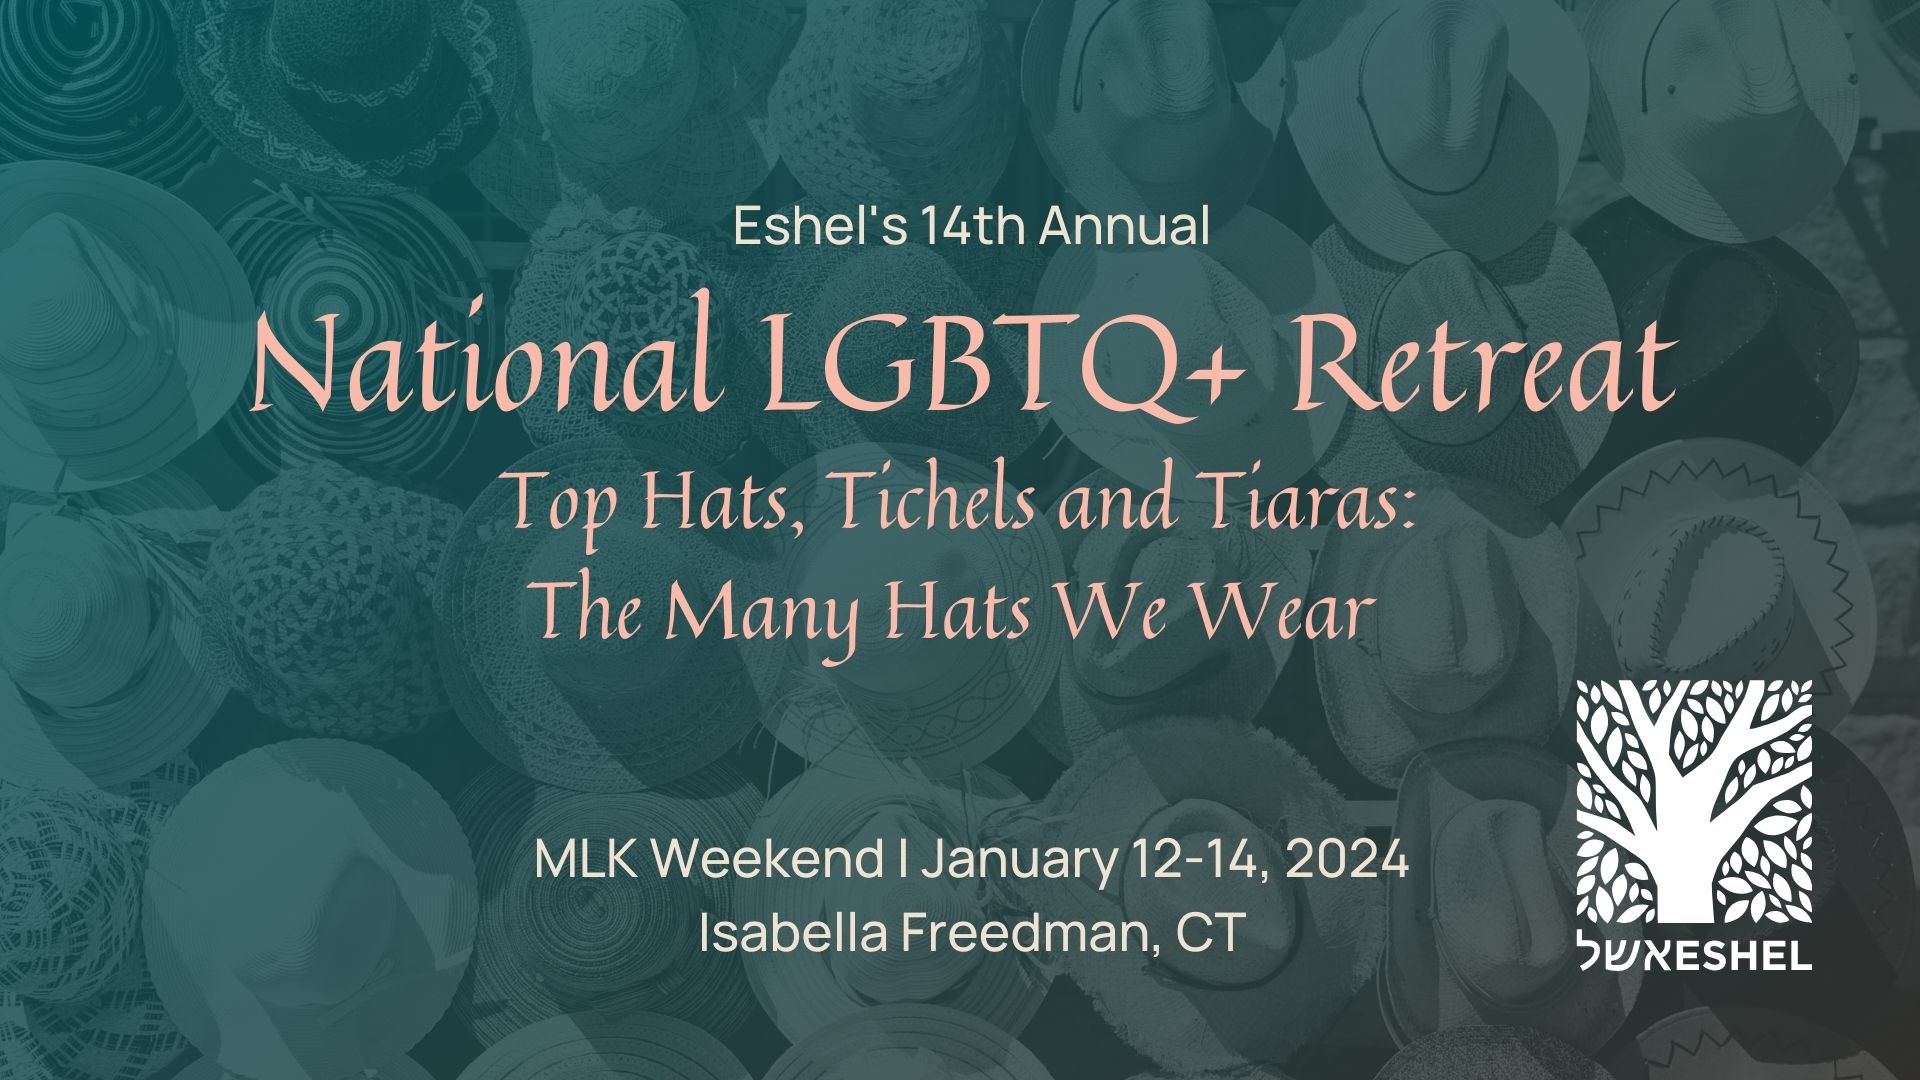 Eshel's 14th Annual National LGBTQ+ Retreat | Top Hats, Tichels, and Tiaras: The Many Hats We Wear | MLK Weekend: January 12-14, 2024, Isabella Freedman, CT